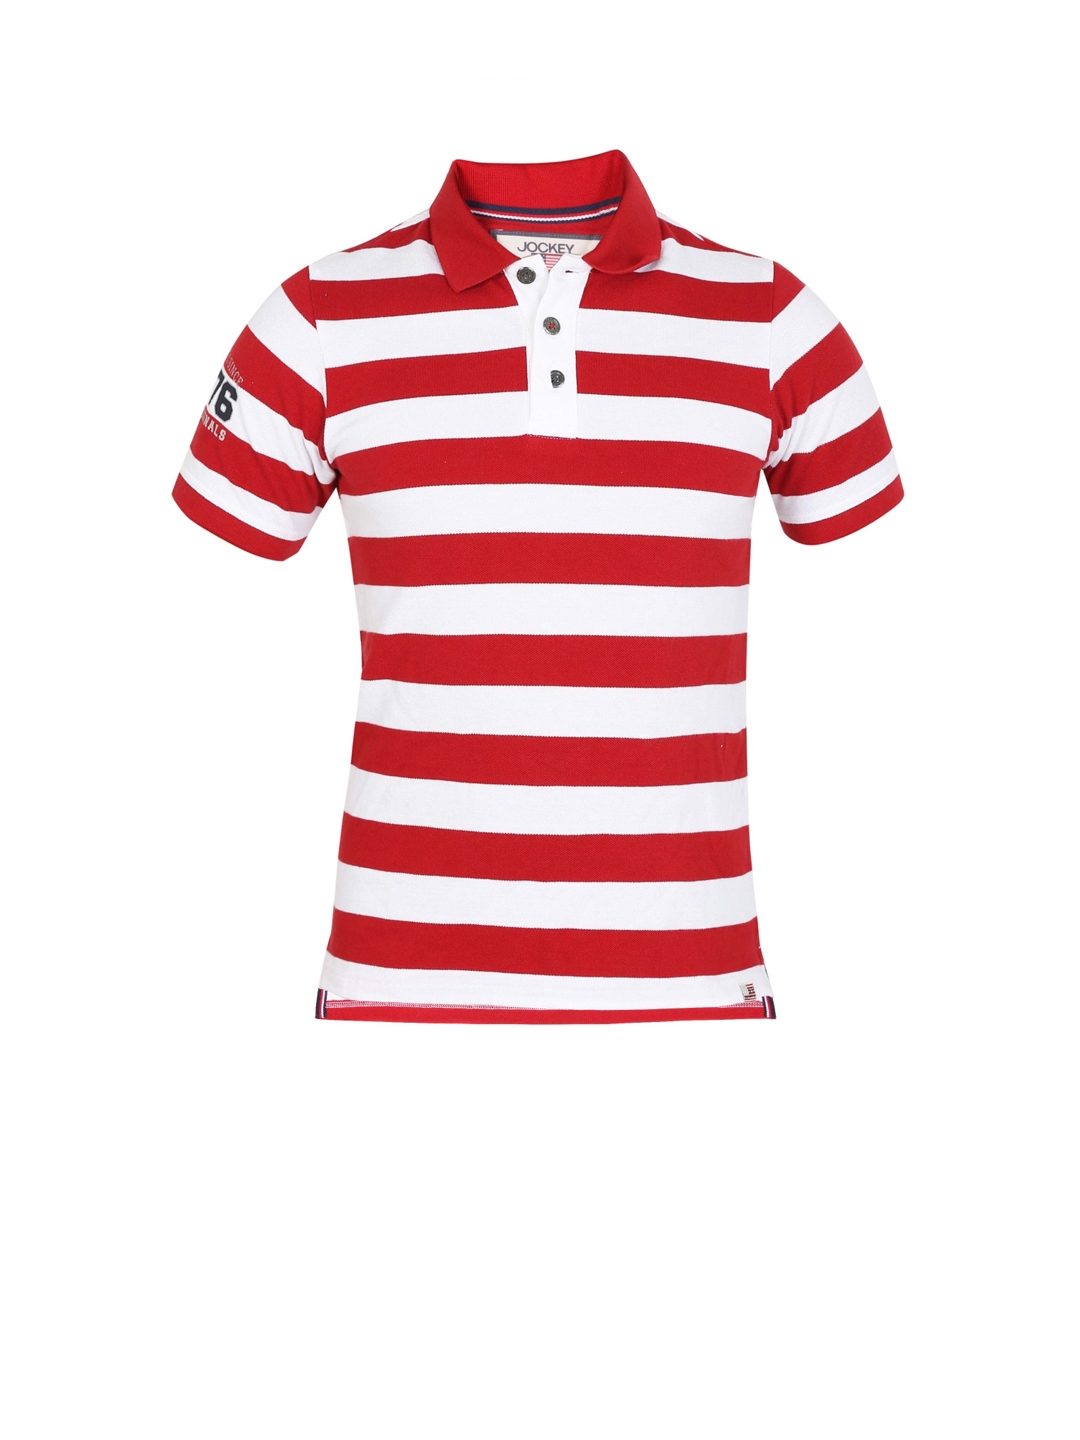 red and white striped shirt boys